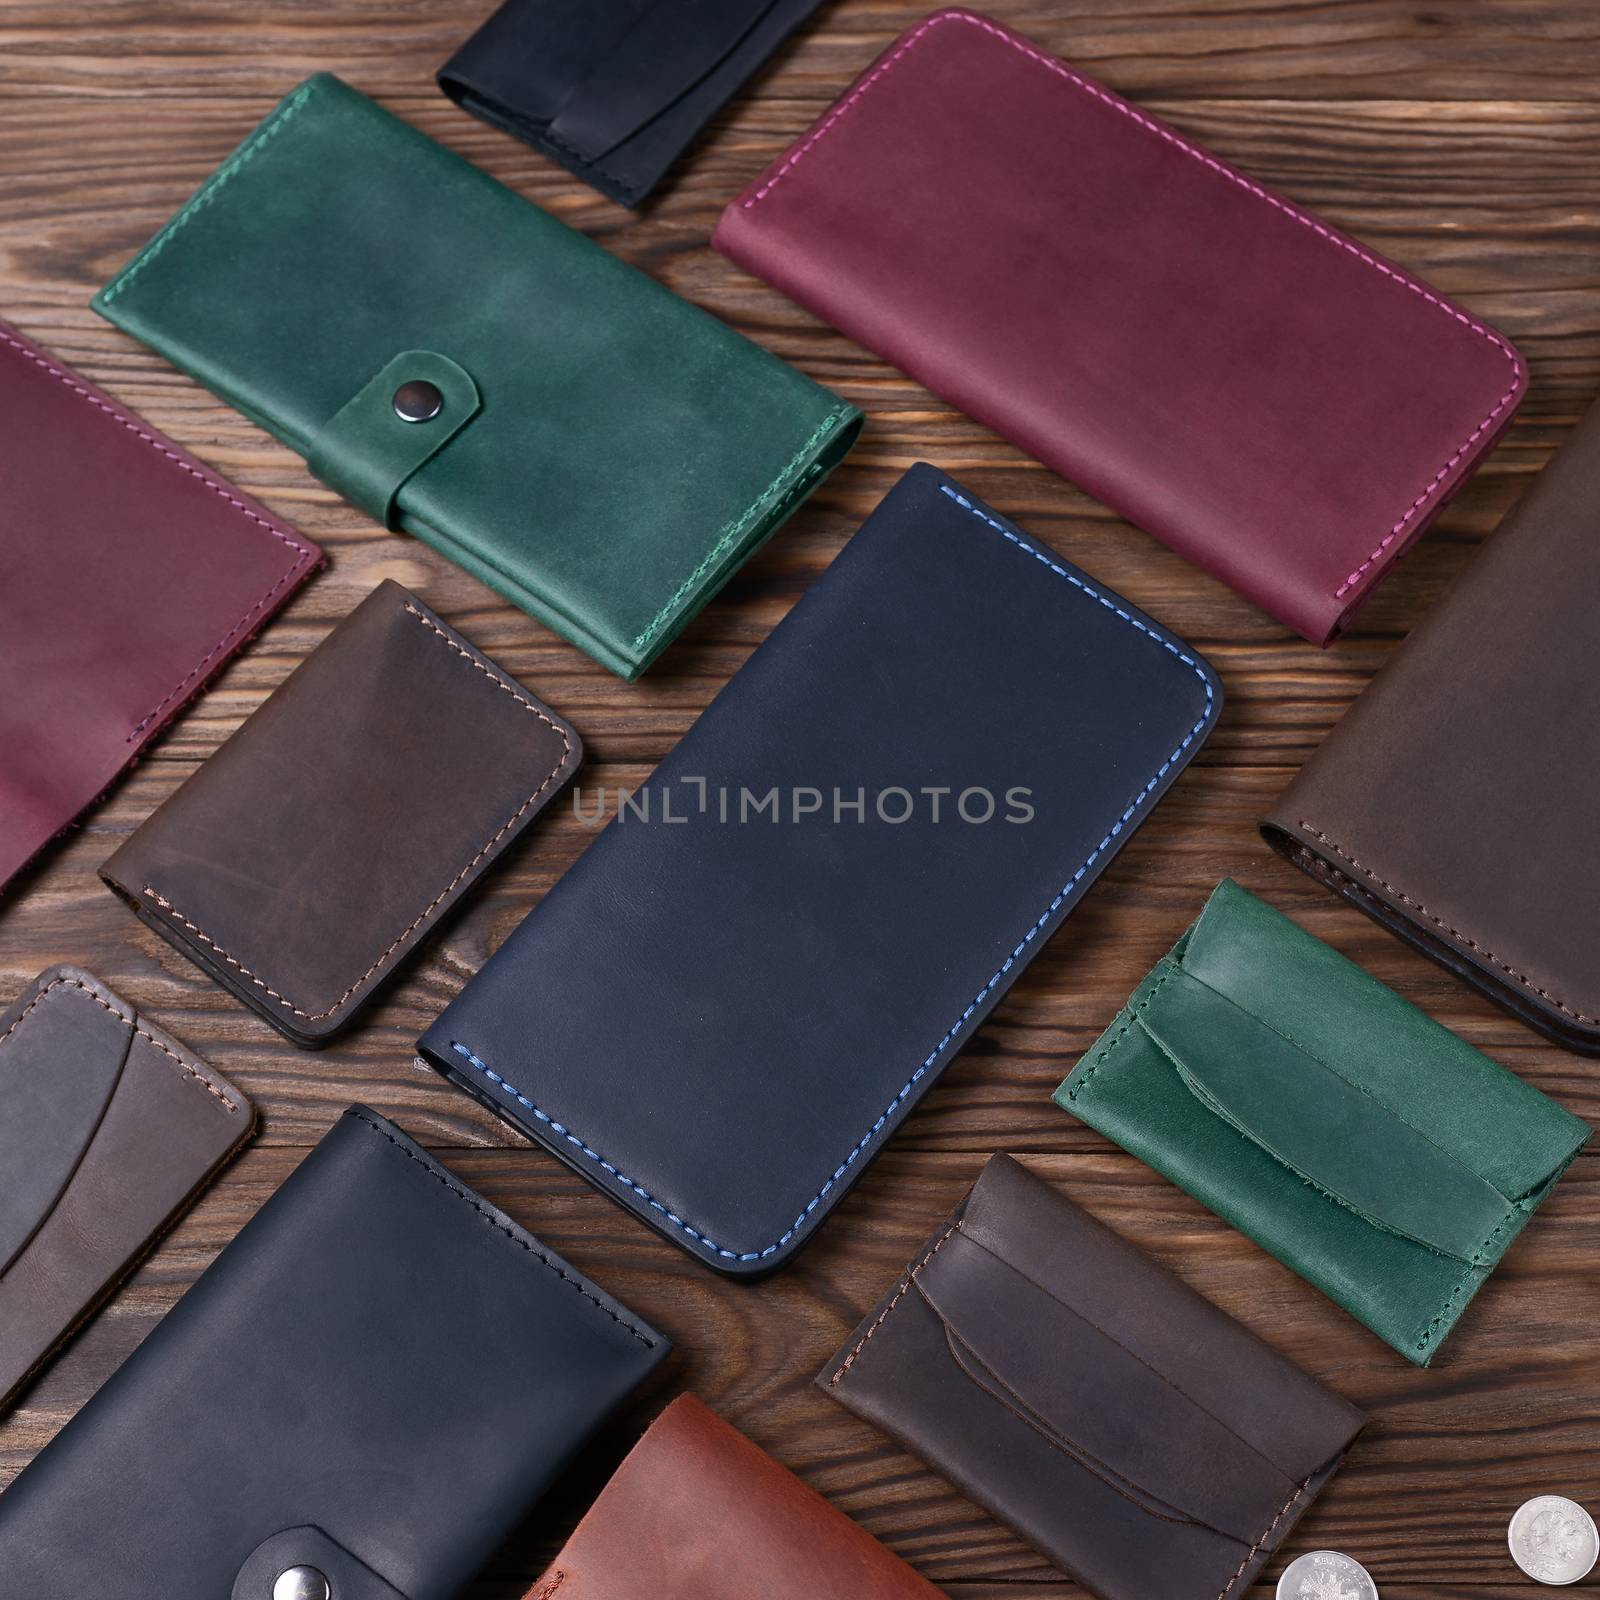 Blue color handmade leather porte-monnaie surrounded by other leather accessories on wooden textured background. Side view. Stock photo of luxury accessories.